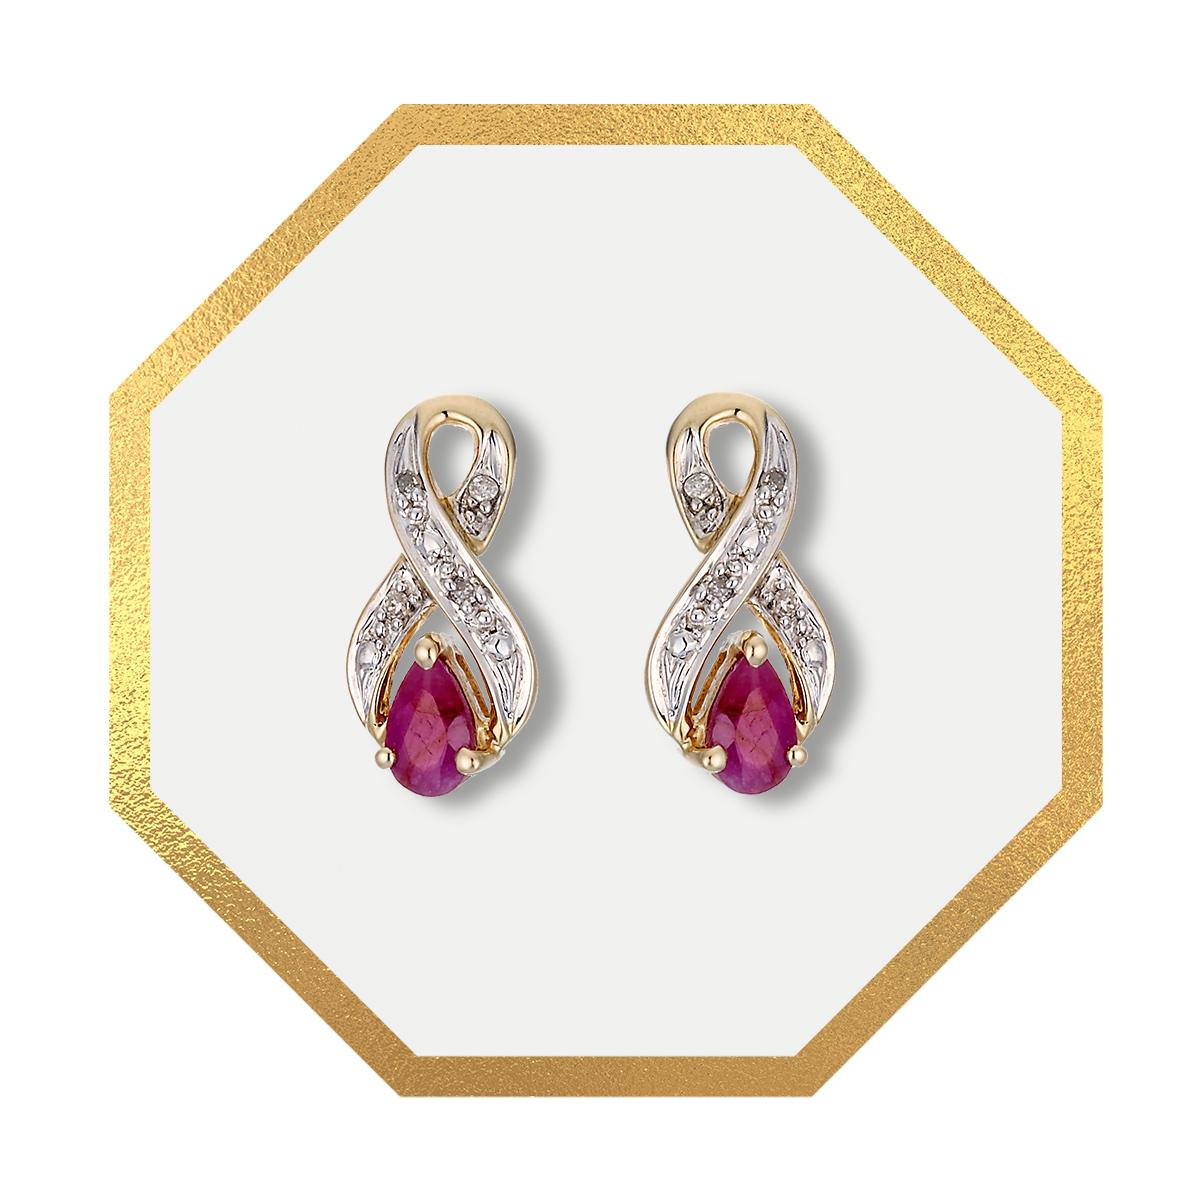 9ct Yellow Gold Rhodium Plated Diamond and Ruby Earrings